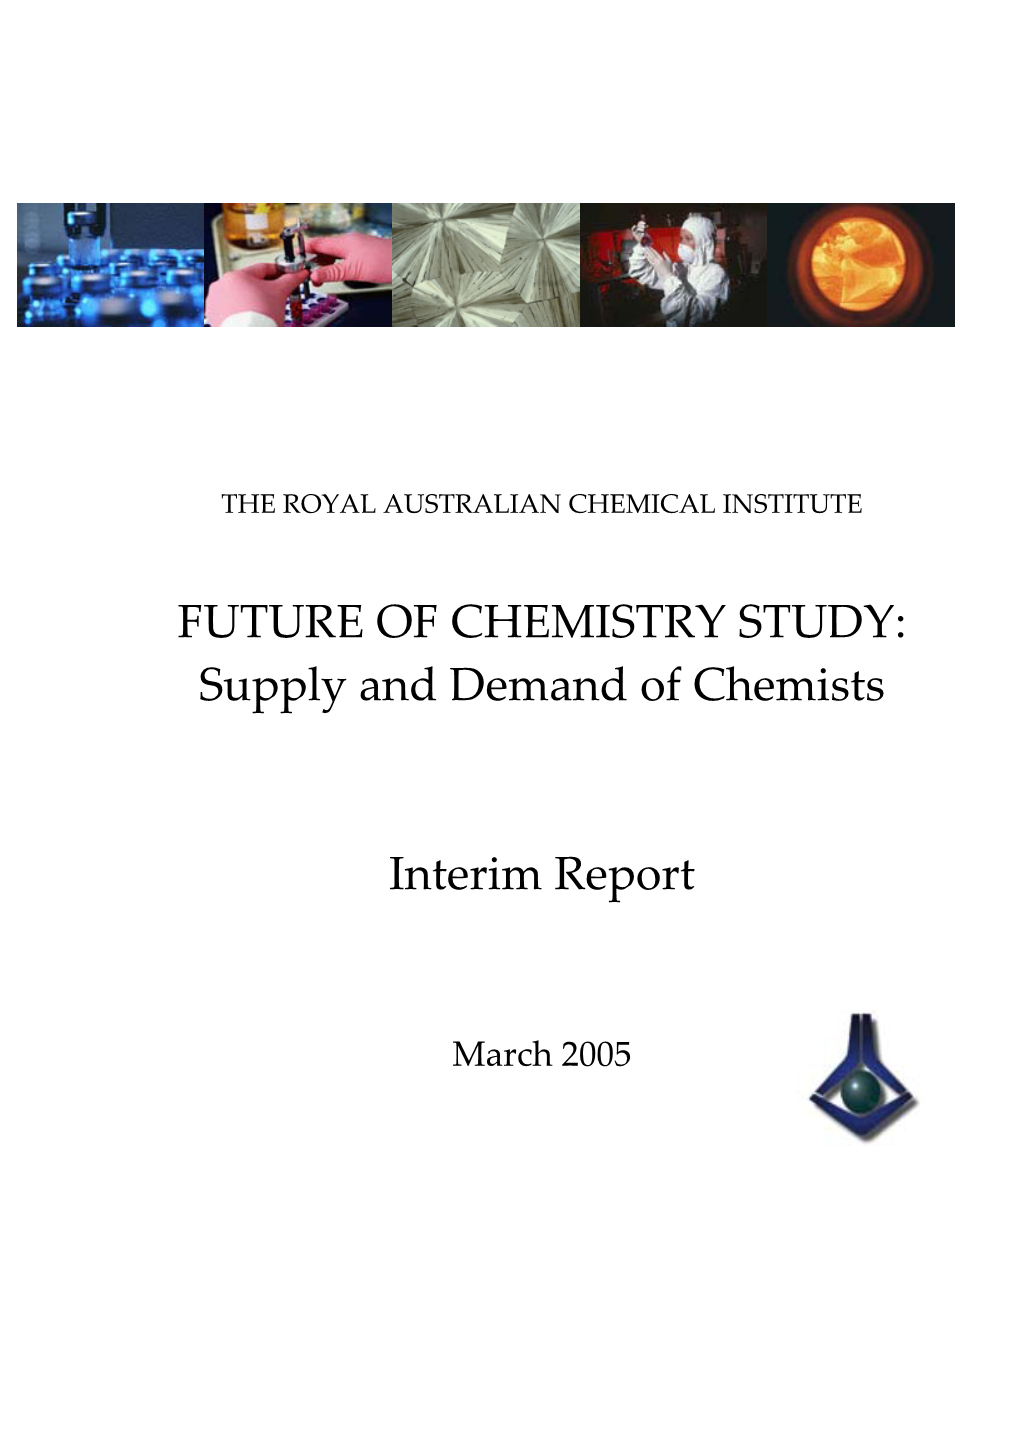 FUTURE of CHEMISTRY STUDY: Supply and Demand of Chemists